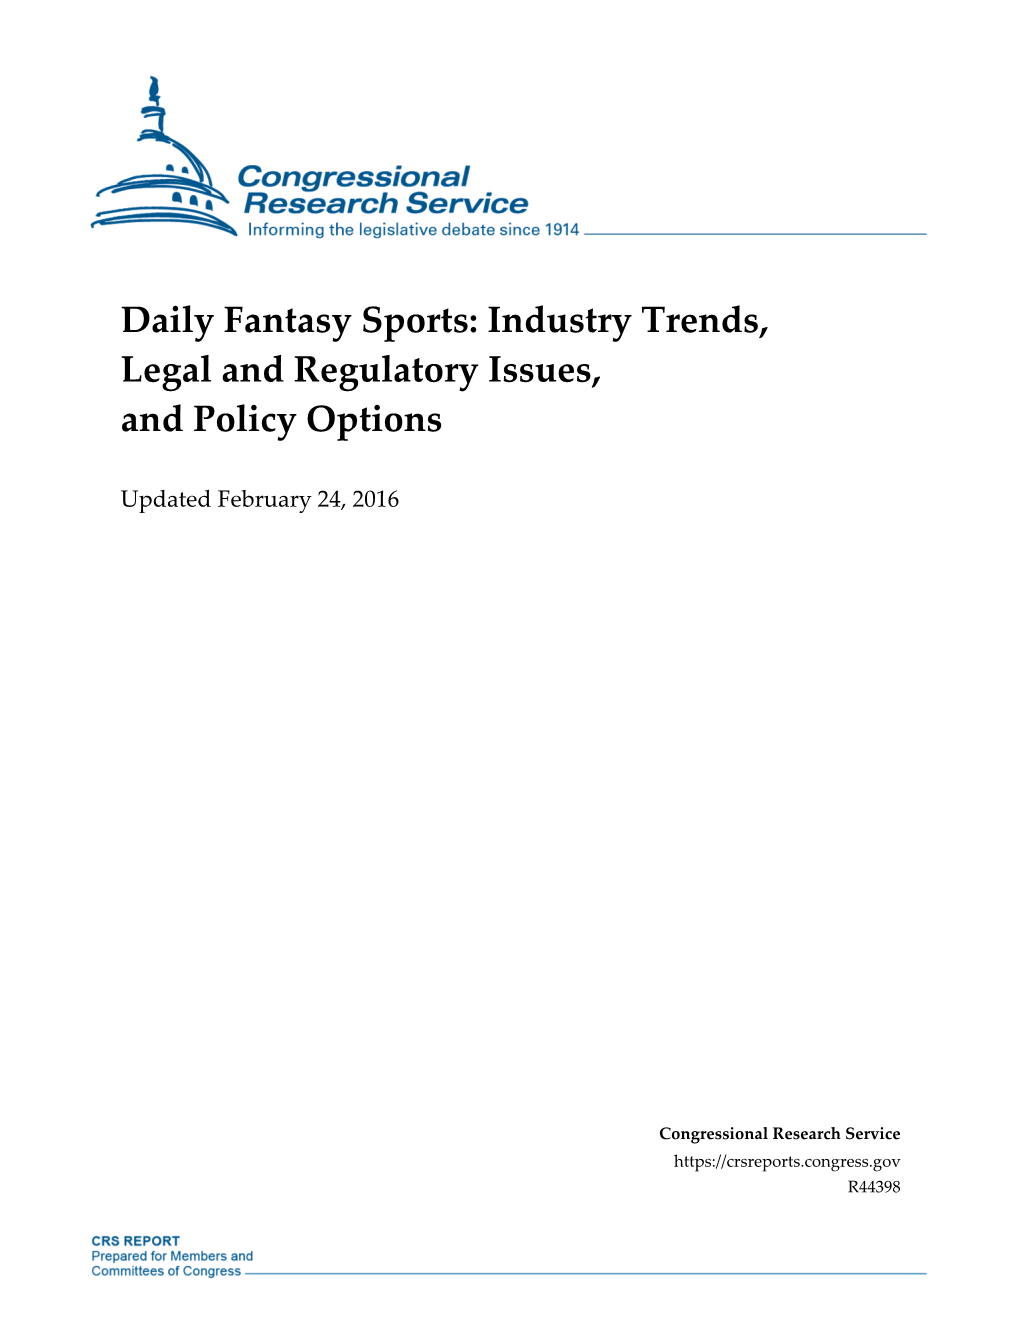 Daily Fantasy Sports: Industry Trends, Legal and Regulatory Issues, and Policy Options